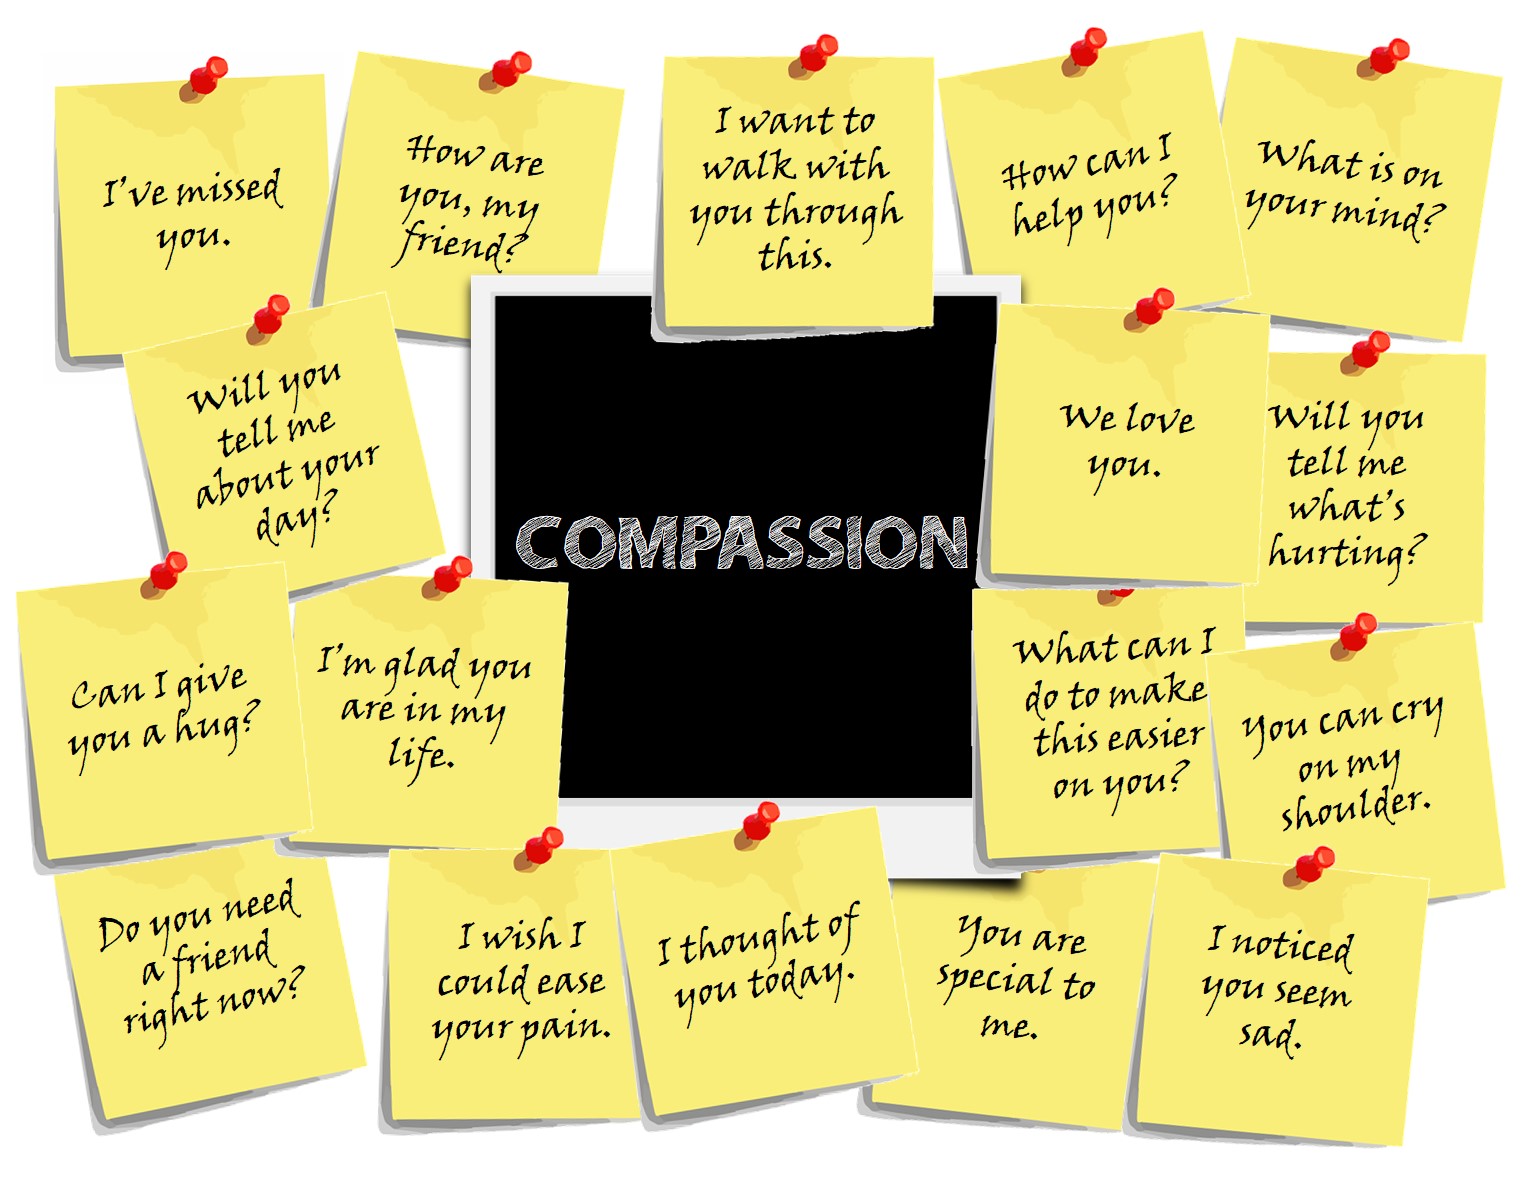 Image with the word Compassion in the middle and surrounded with post it notes with messages of compassion on them.